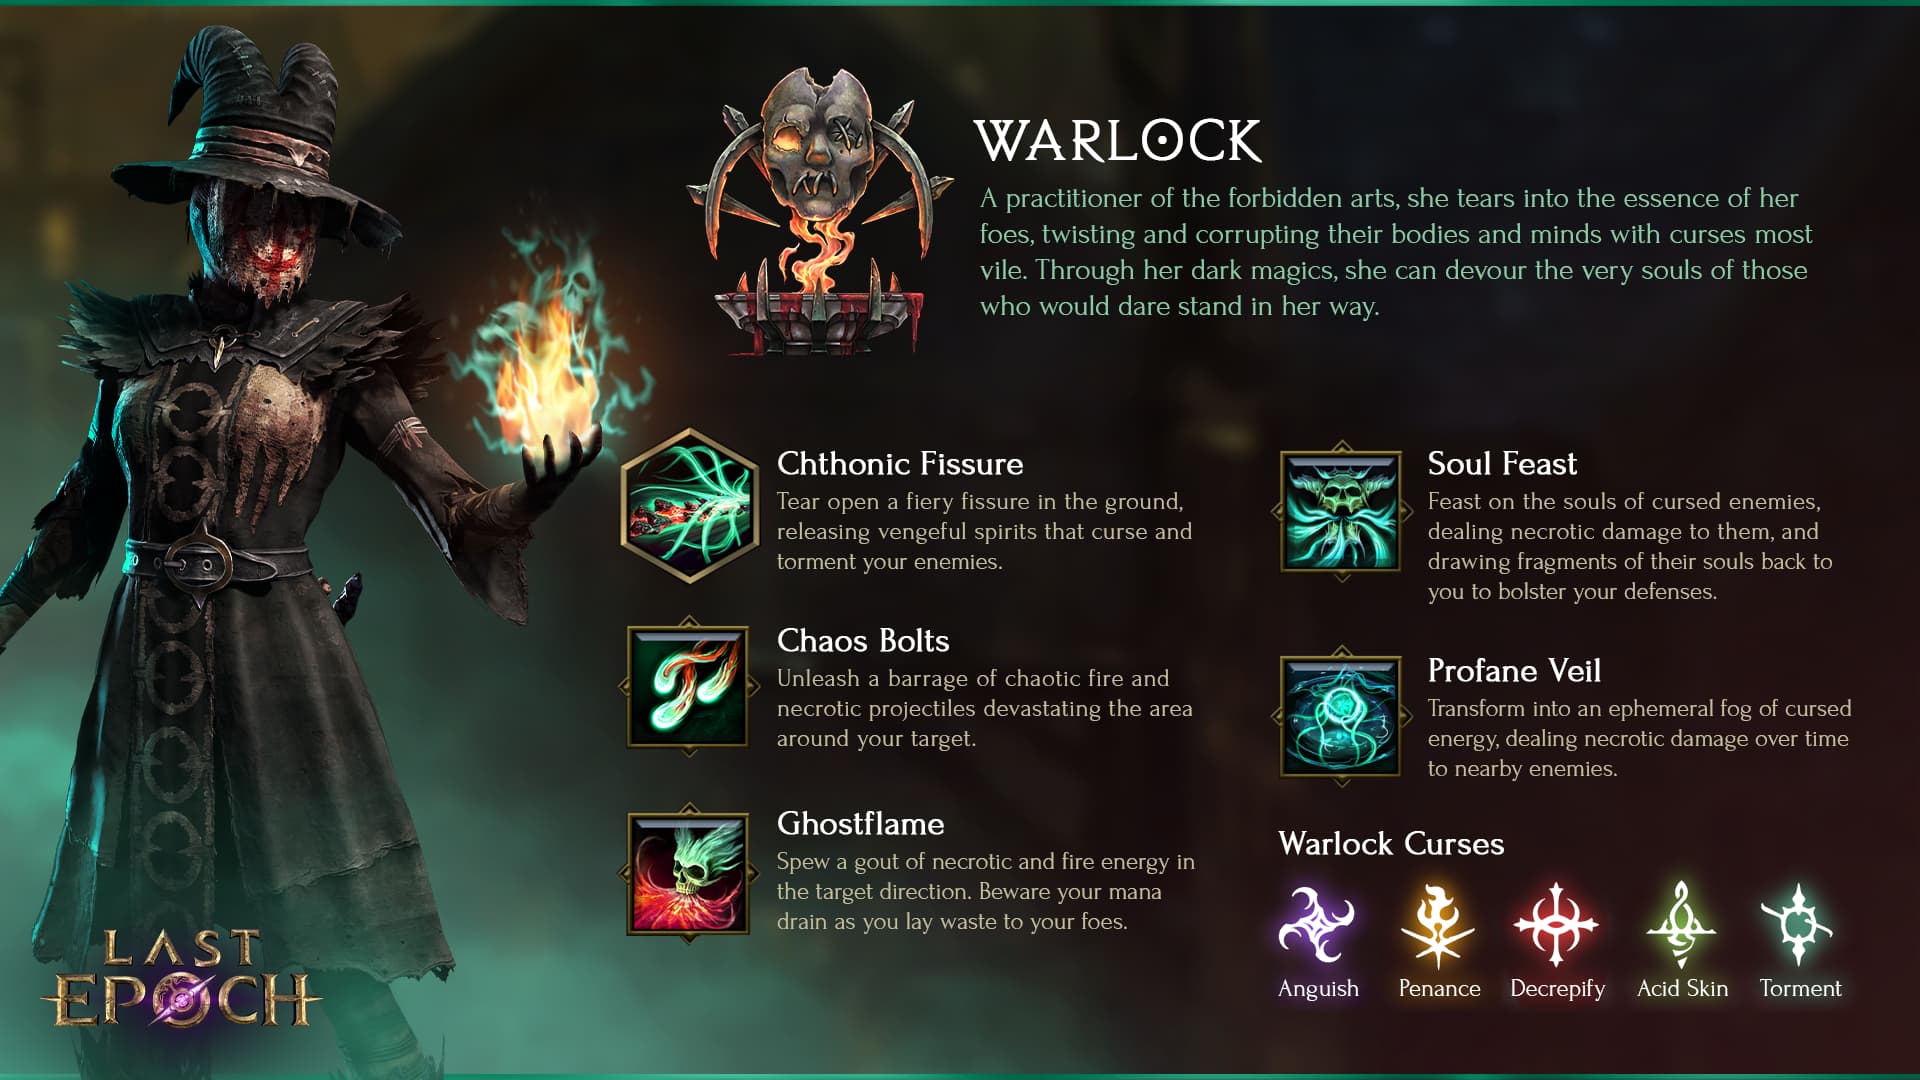 A promotional image of the Warlock mastery from The Last Epoch.